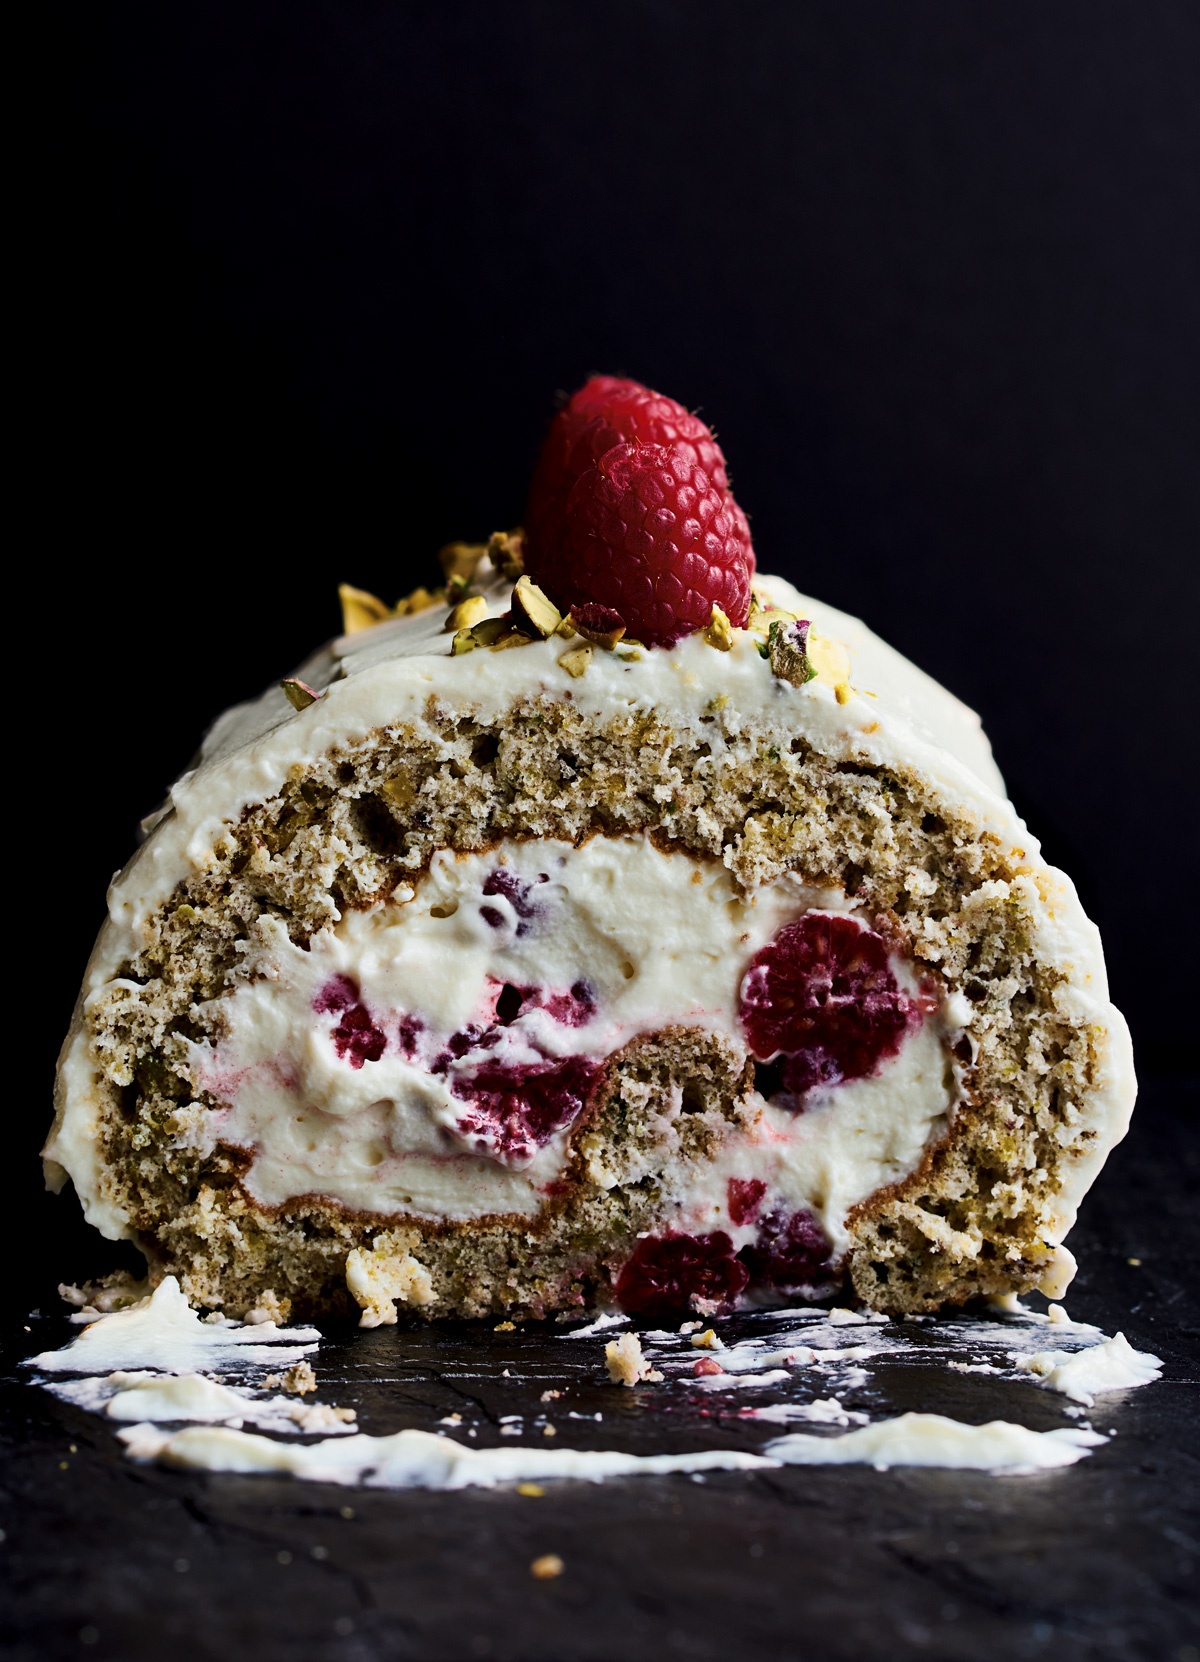 Image of Yotam Ottolenghi's Pistachio Roulade with Raspberries and White Chocolate